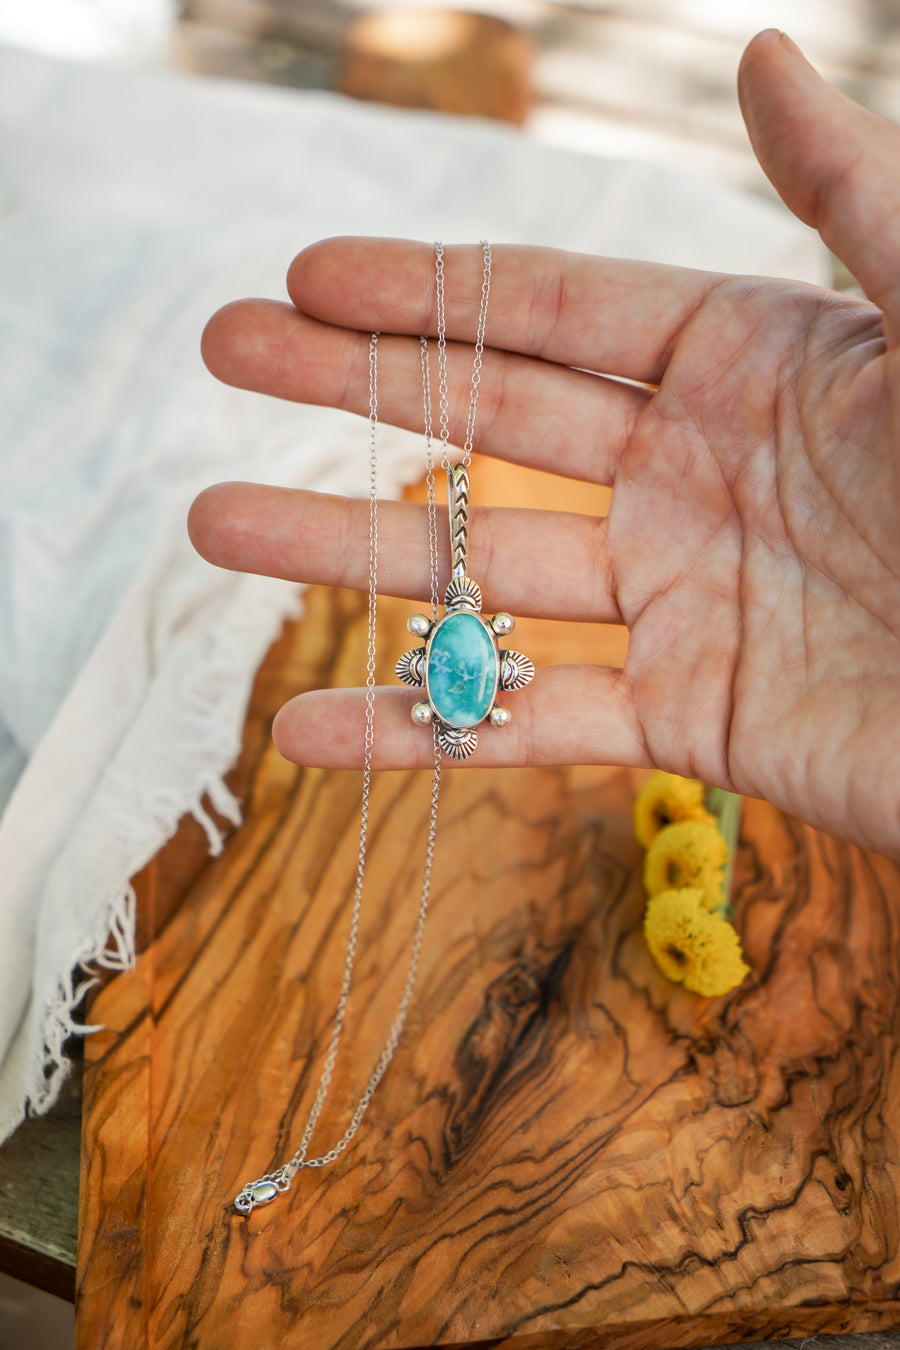 Pendant in Whitewater Turquoise